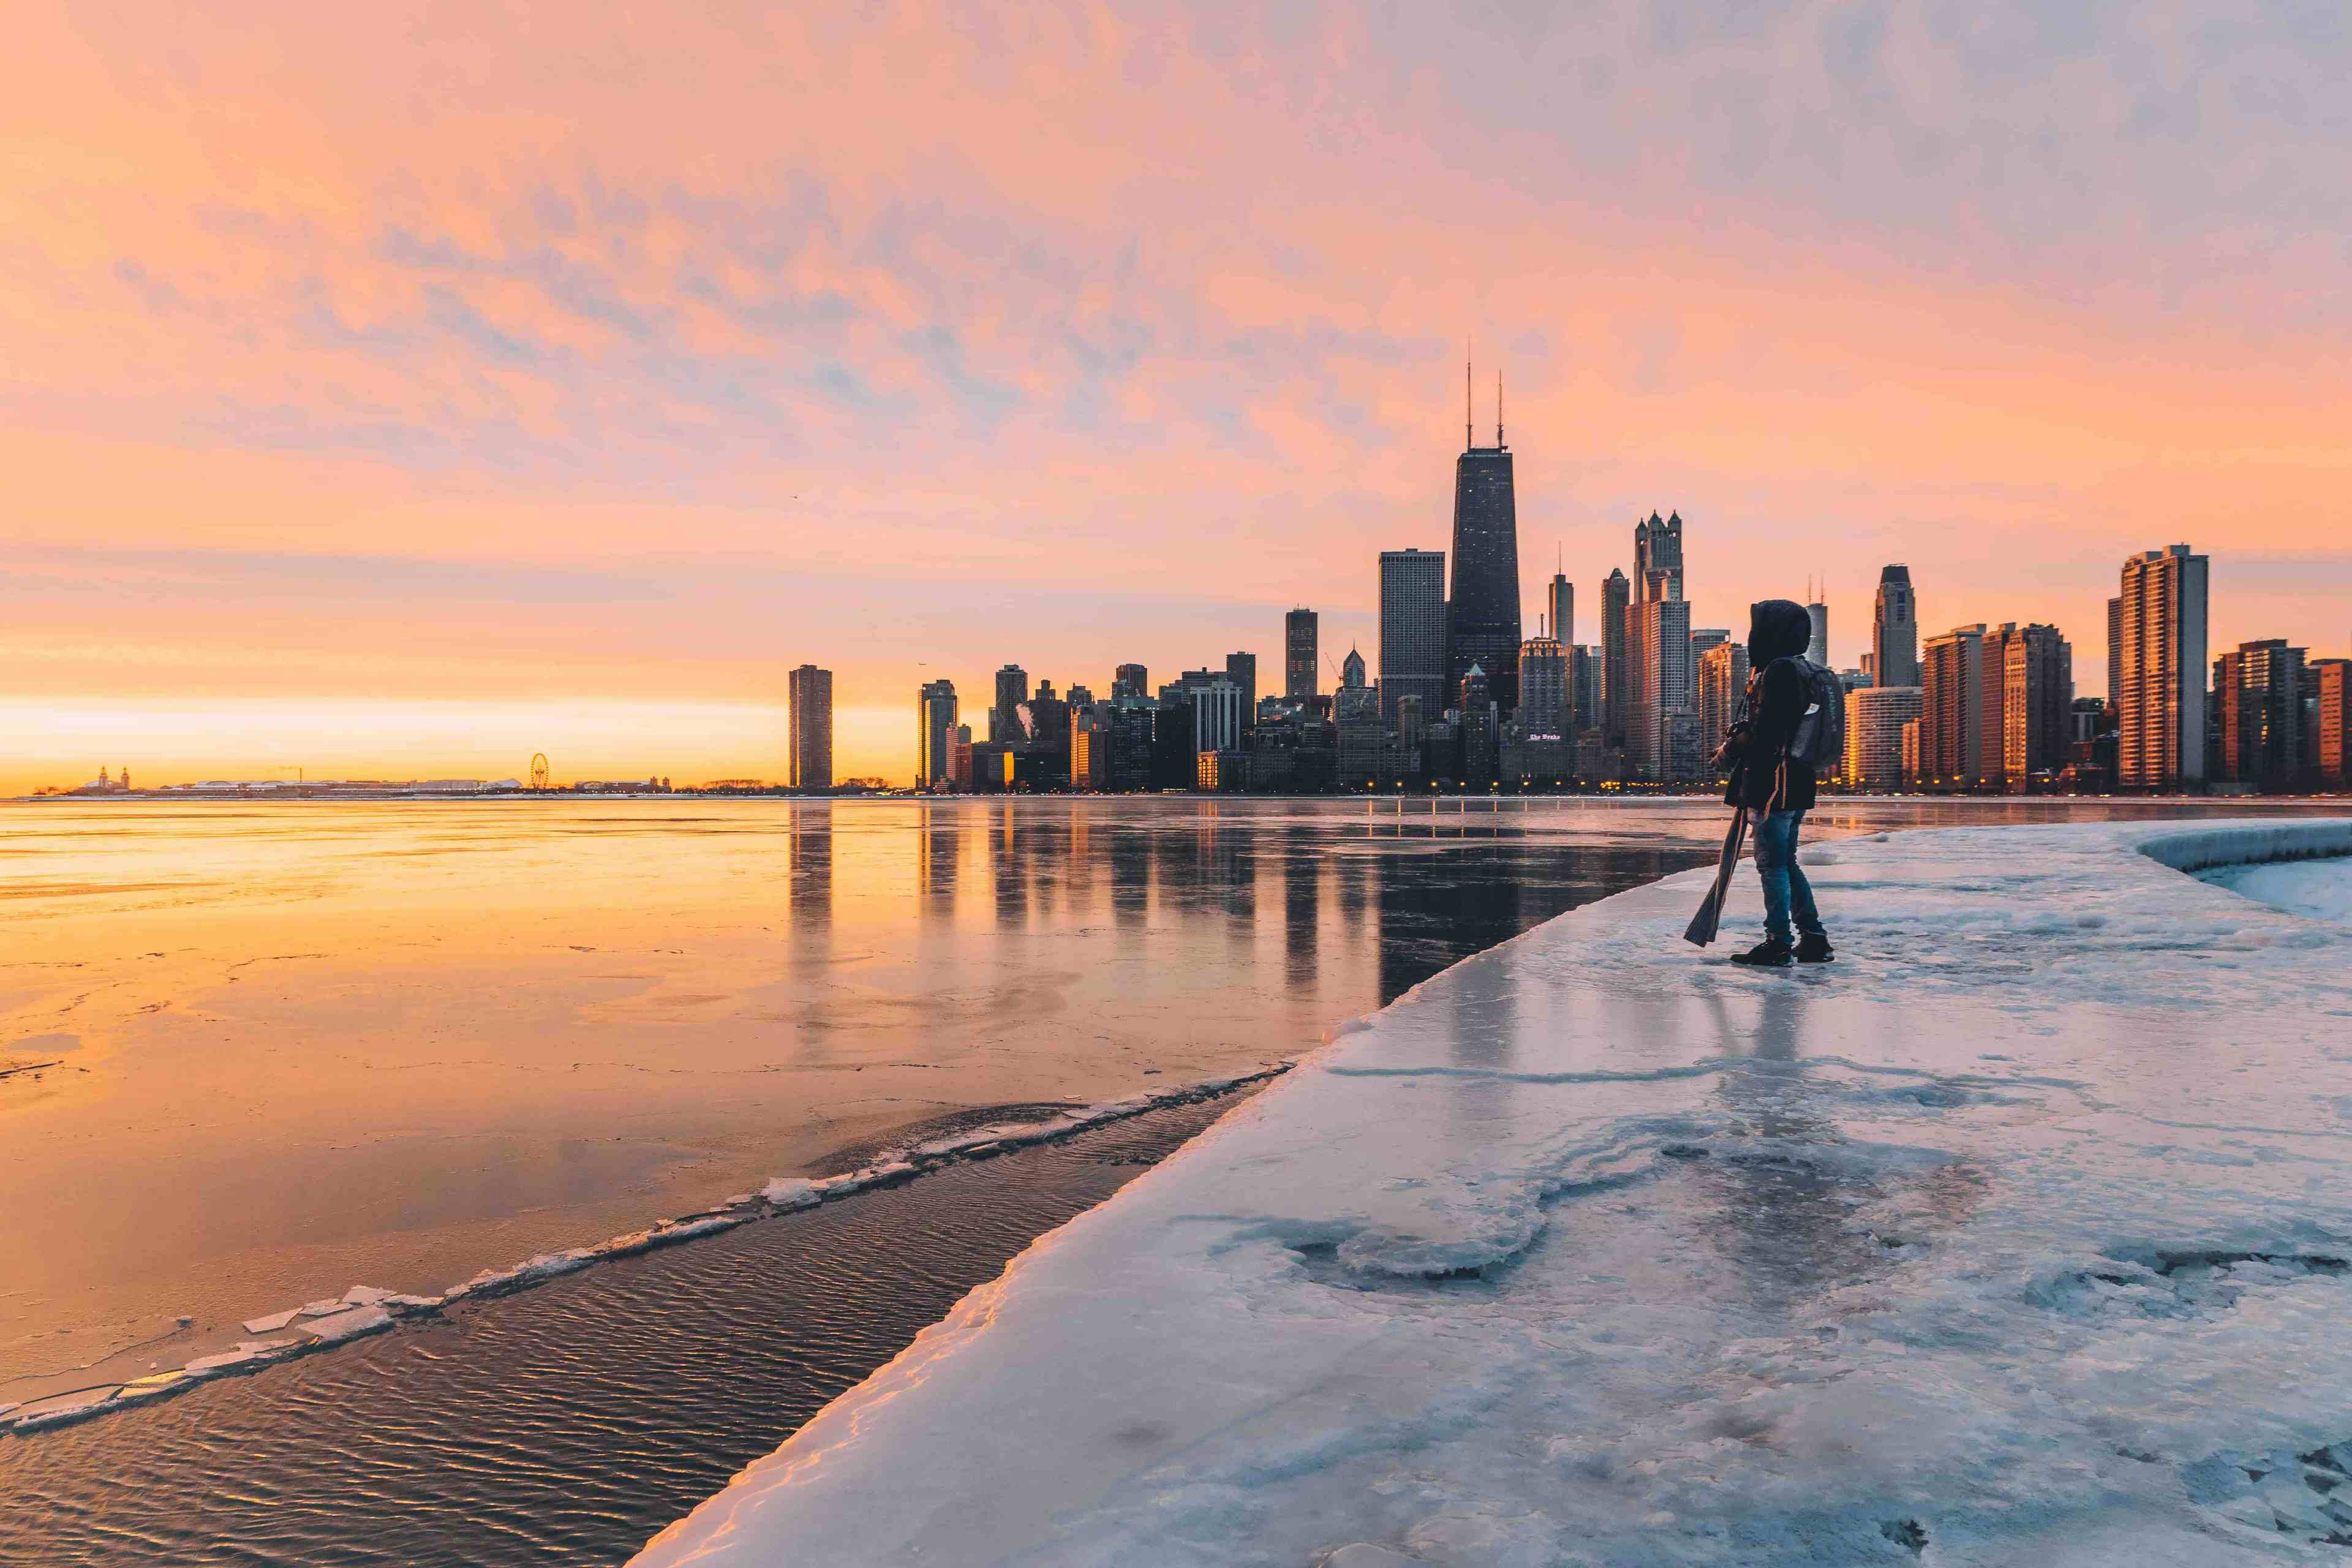 A sunrise in Chicago waterfront with myself standing on the edge of a pathway